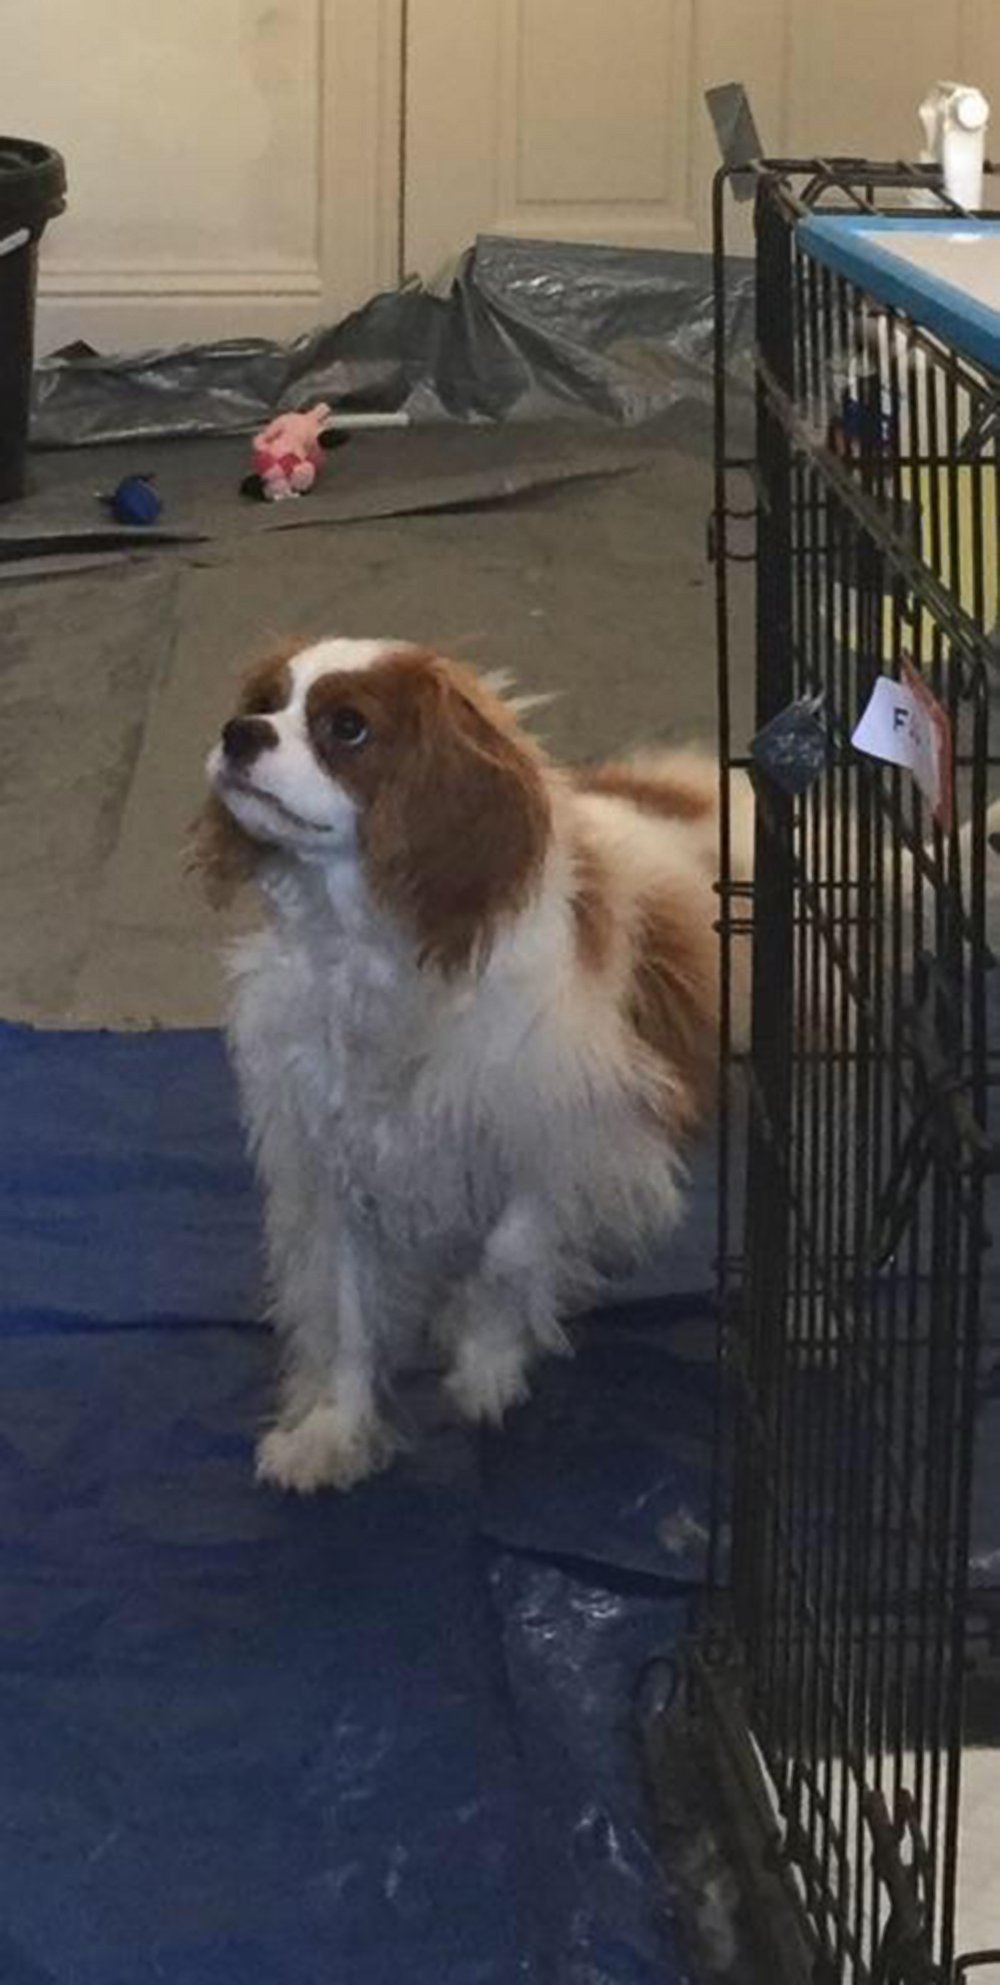 PHOTO: Nina Pham, a Dallas nurse who survived Ebola, is expected to be reunited with her dog, Bentley on Nov. 1, 2014.